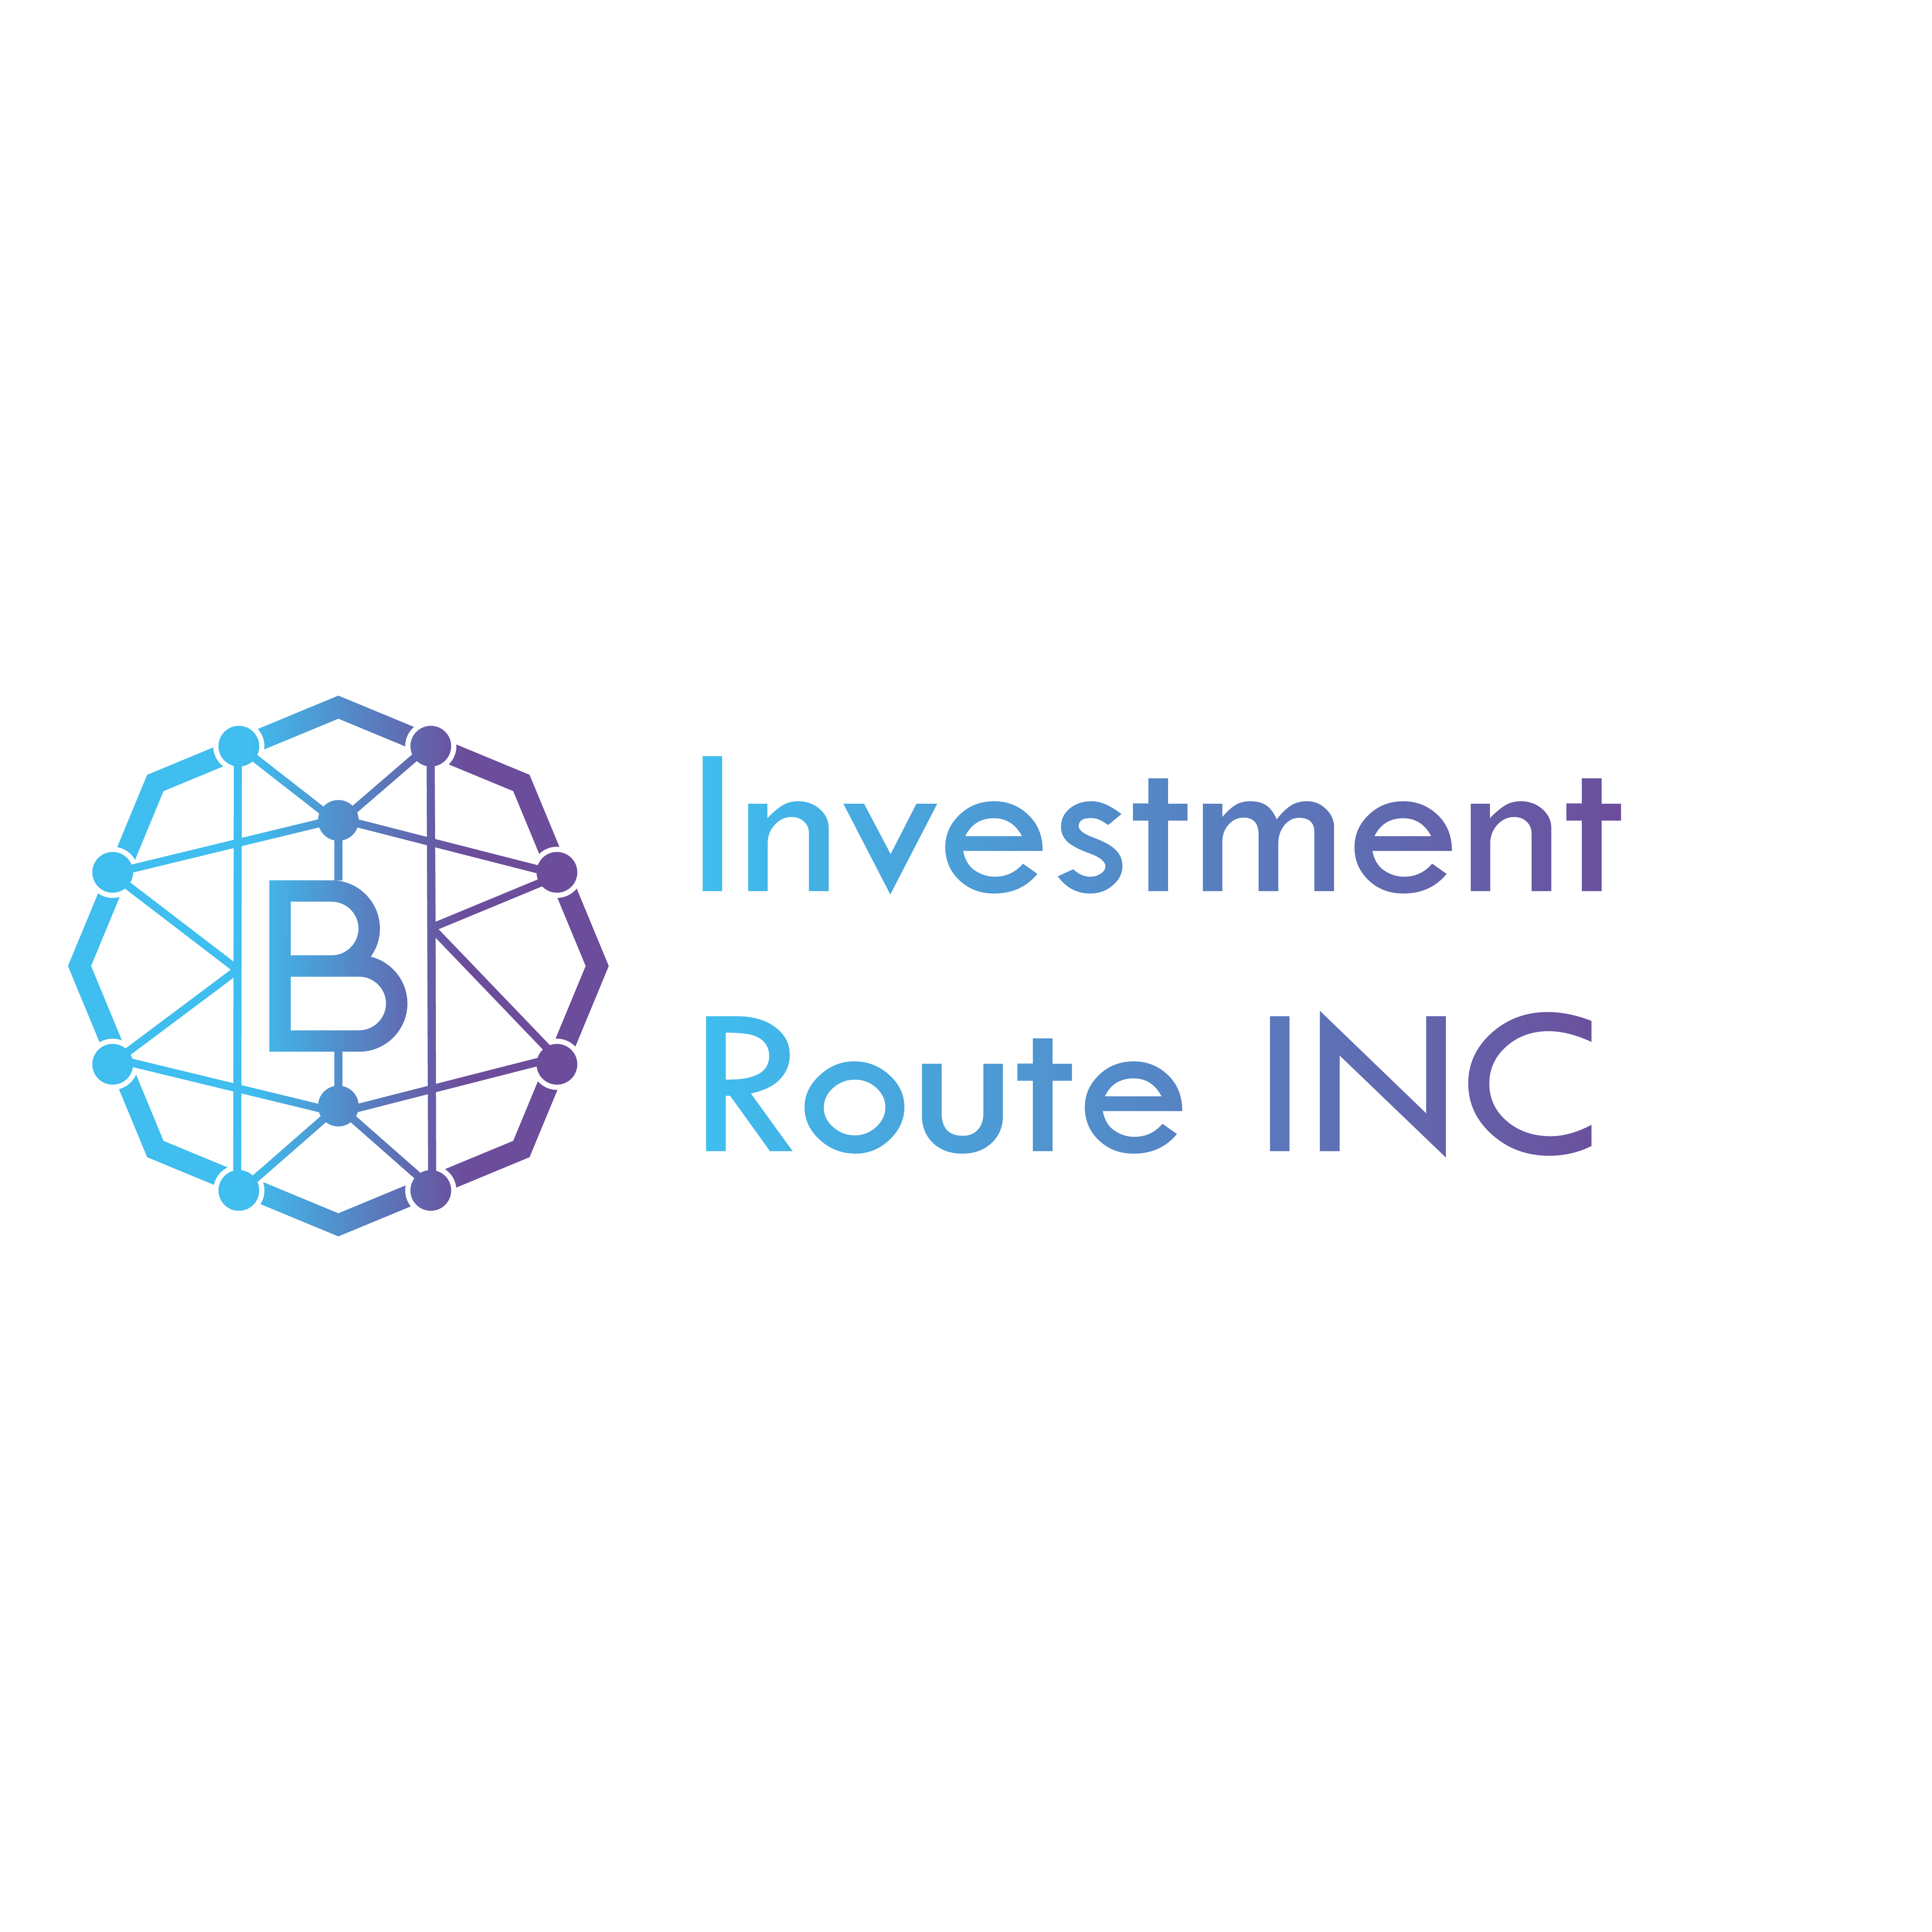 Investment Route Inc